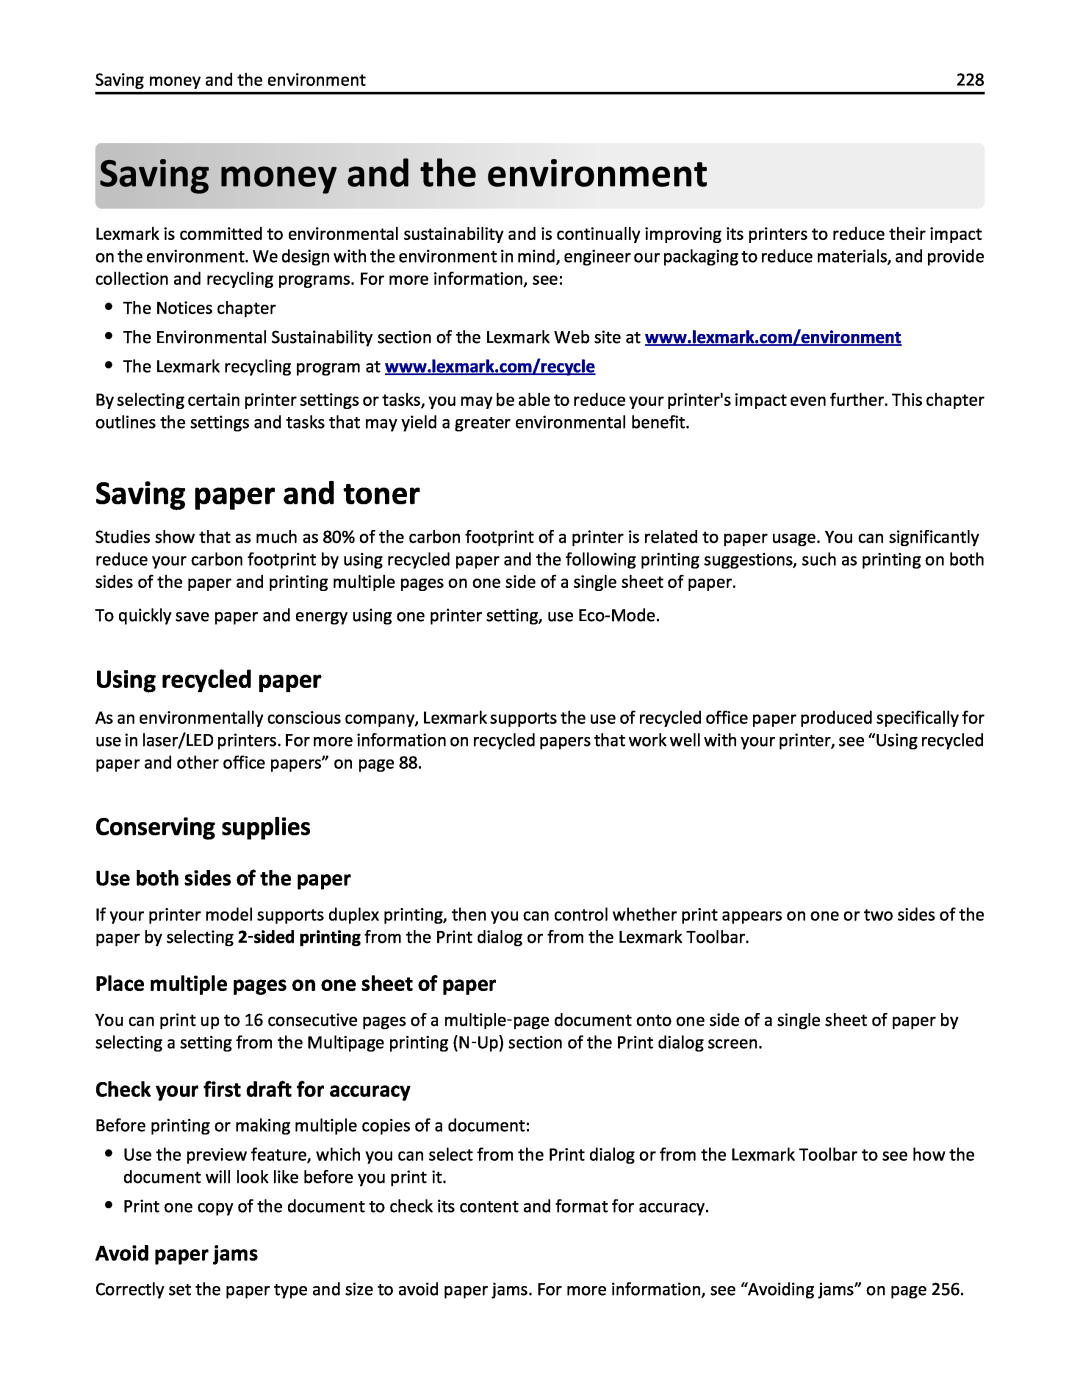 Lexmark 237, MX710DHE Saving money andthe environment, Saving paper and toner, Using recycled paper, Conserving supplies 